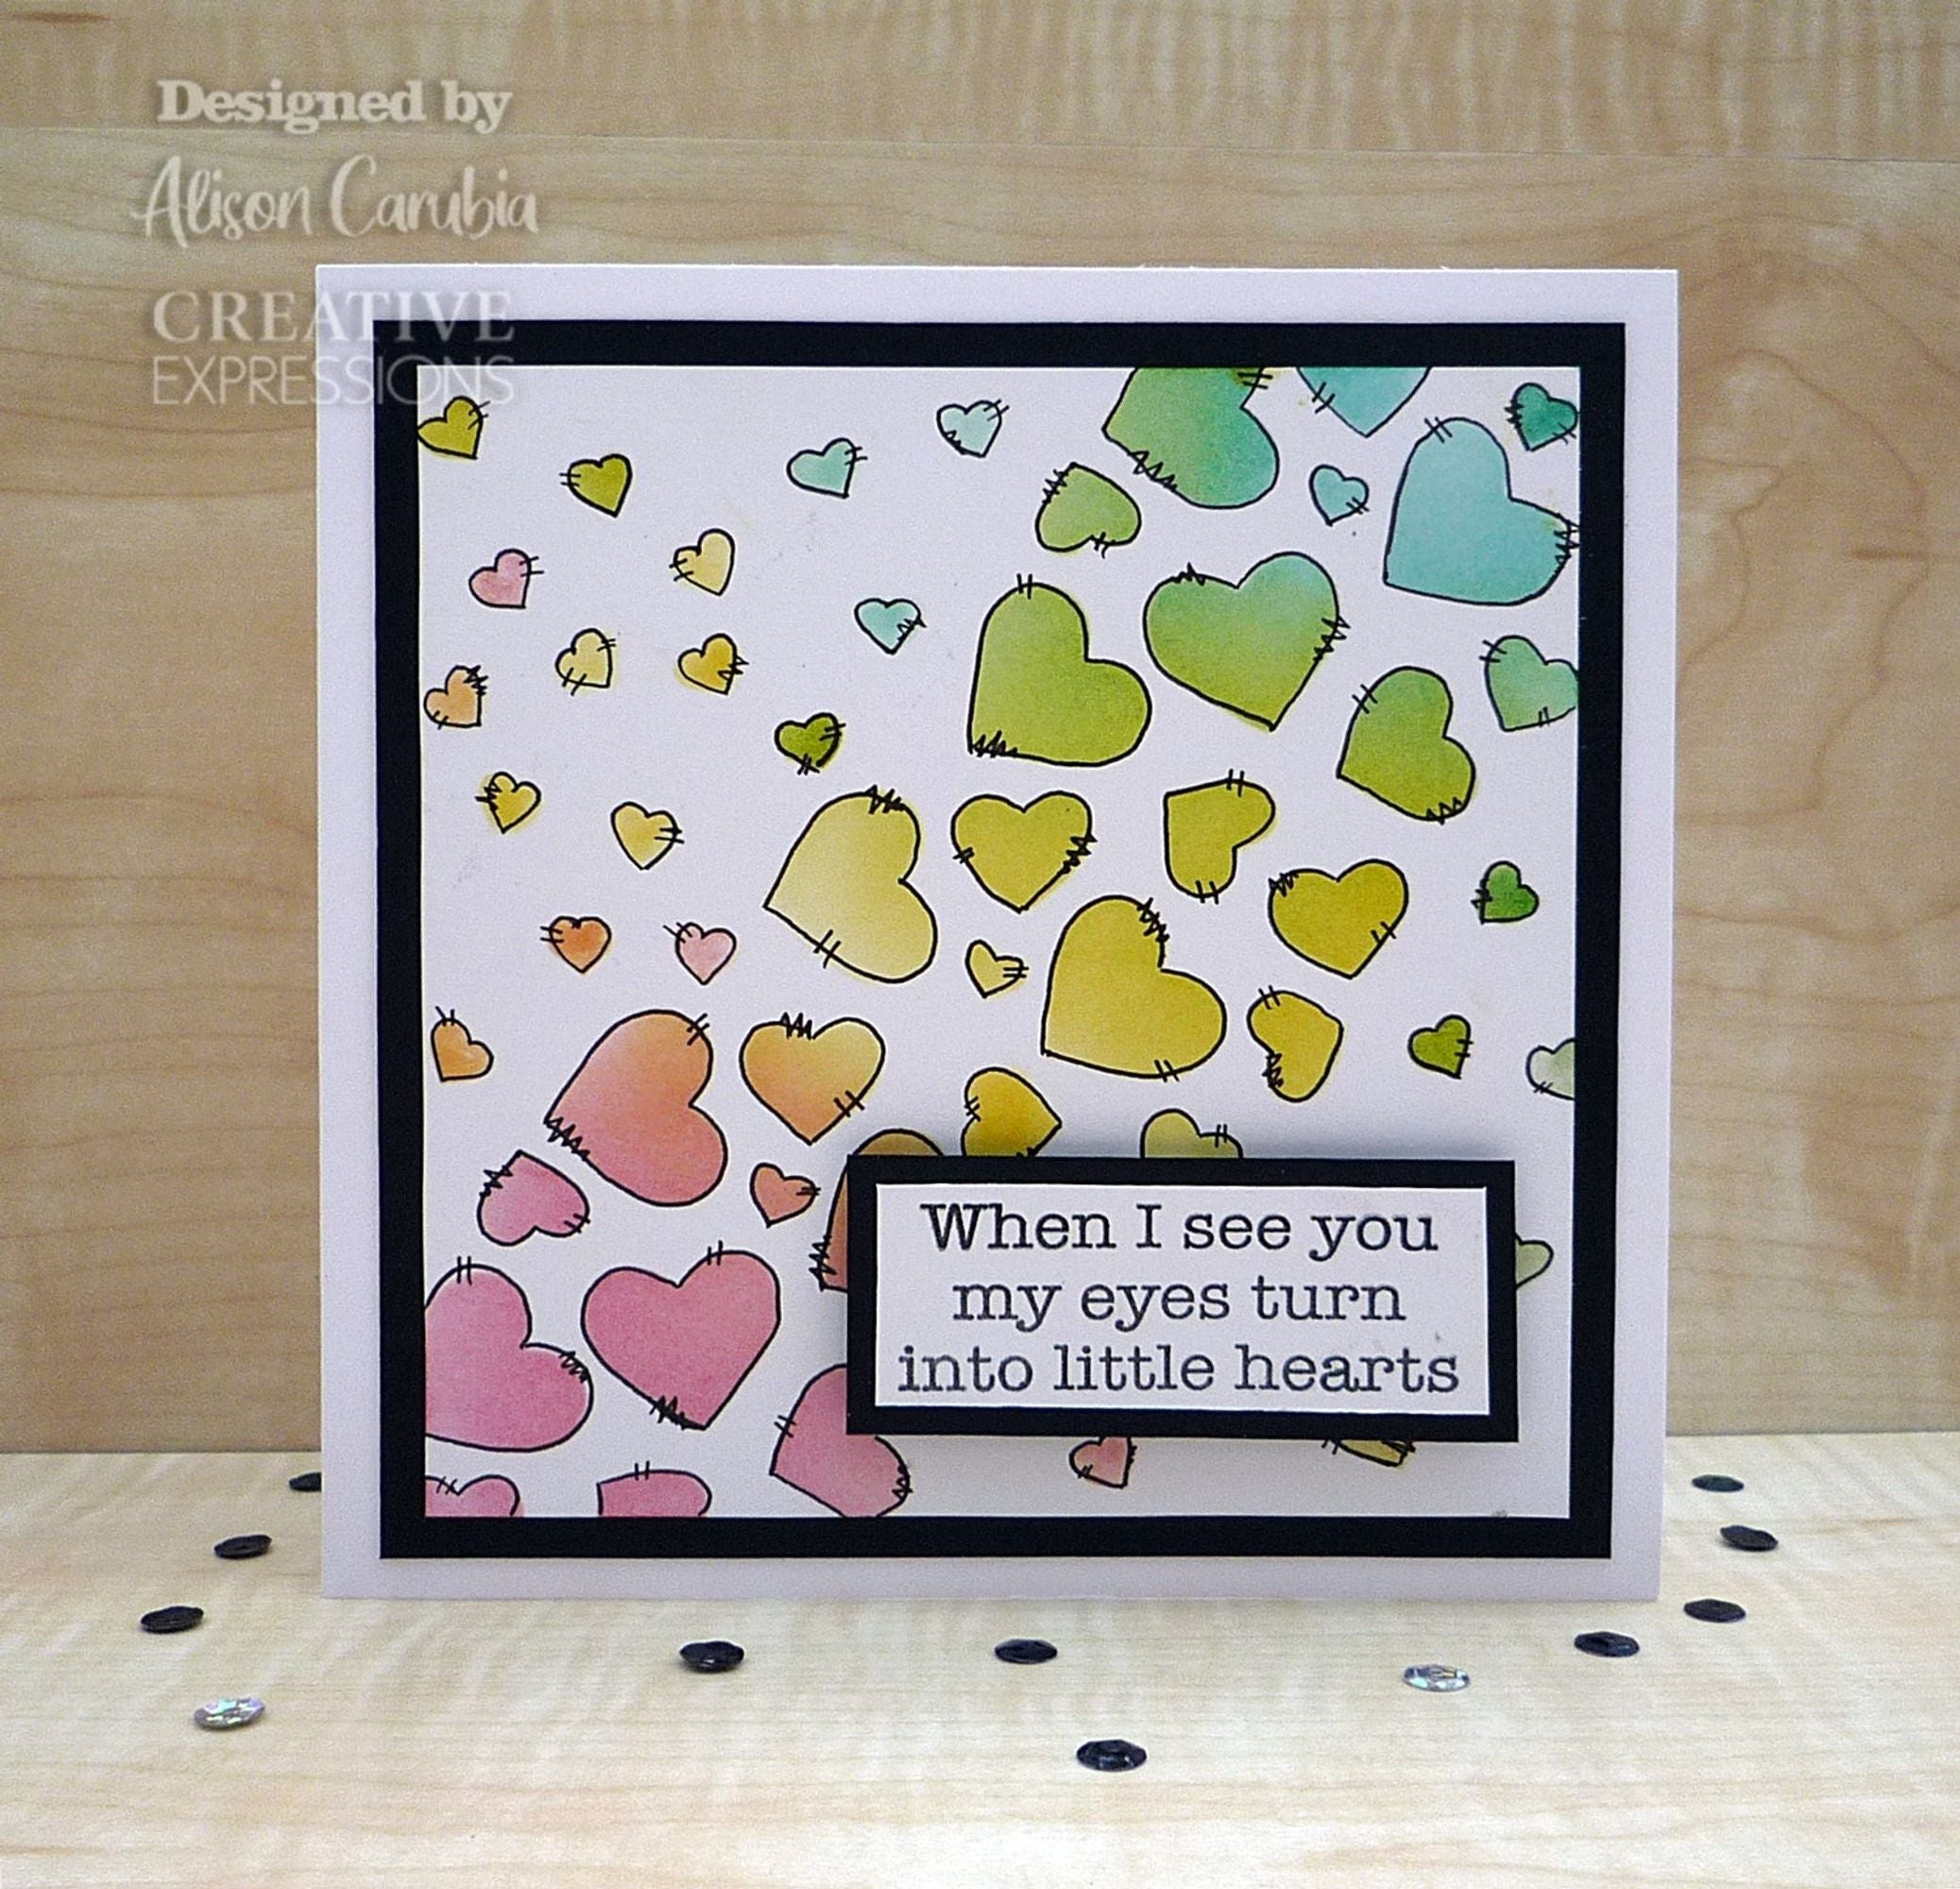 Creative Expressions Mini Stencil Scattered Hearts 4.0 in x 3.0 in